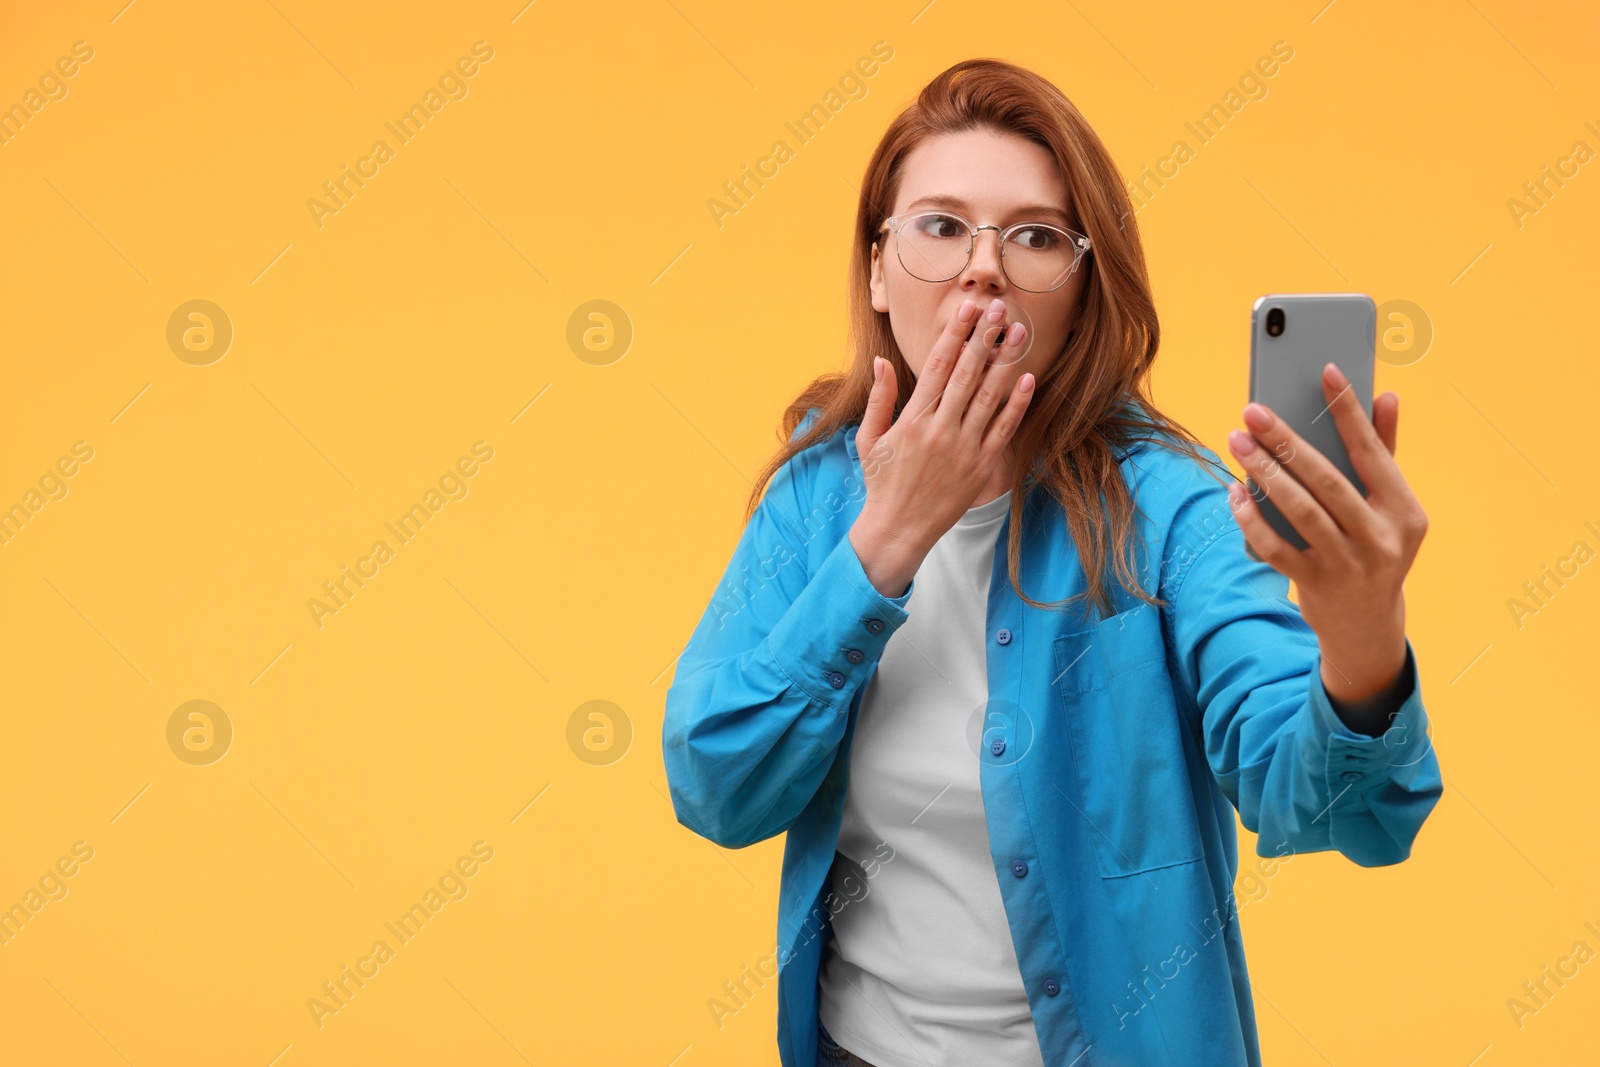 Photo of Emotional woman in eyeglasses taking selfie on orange background. Space for text